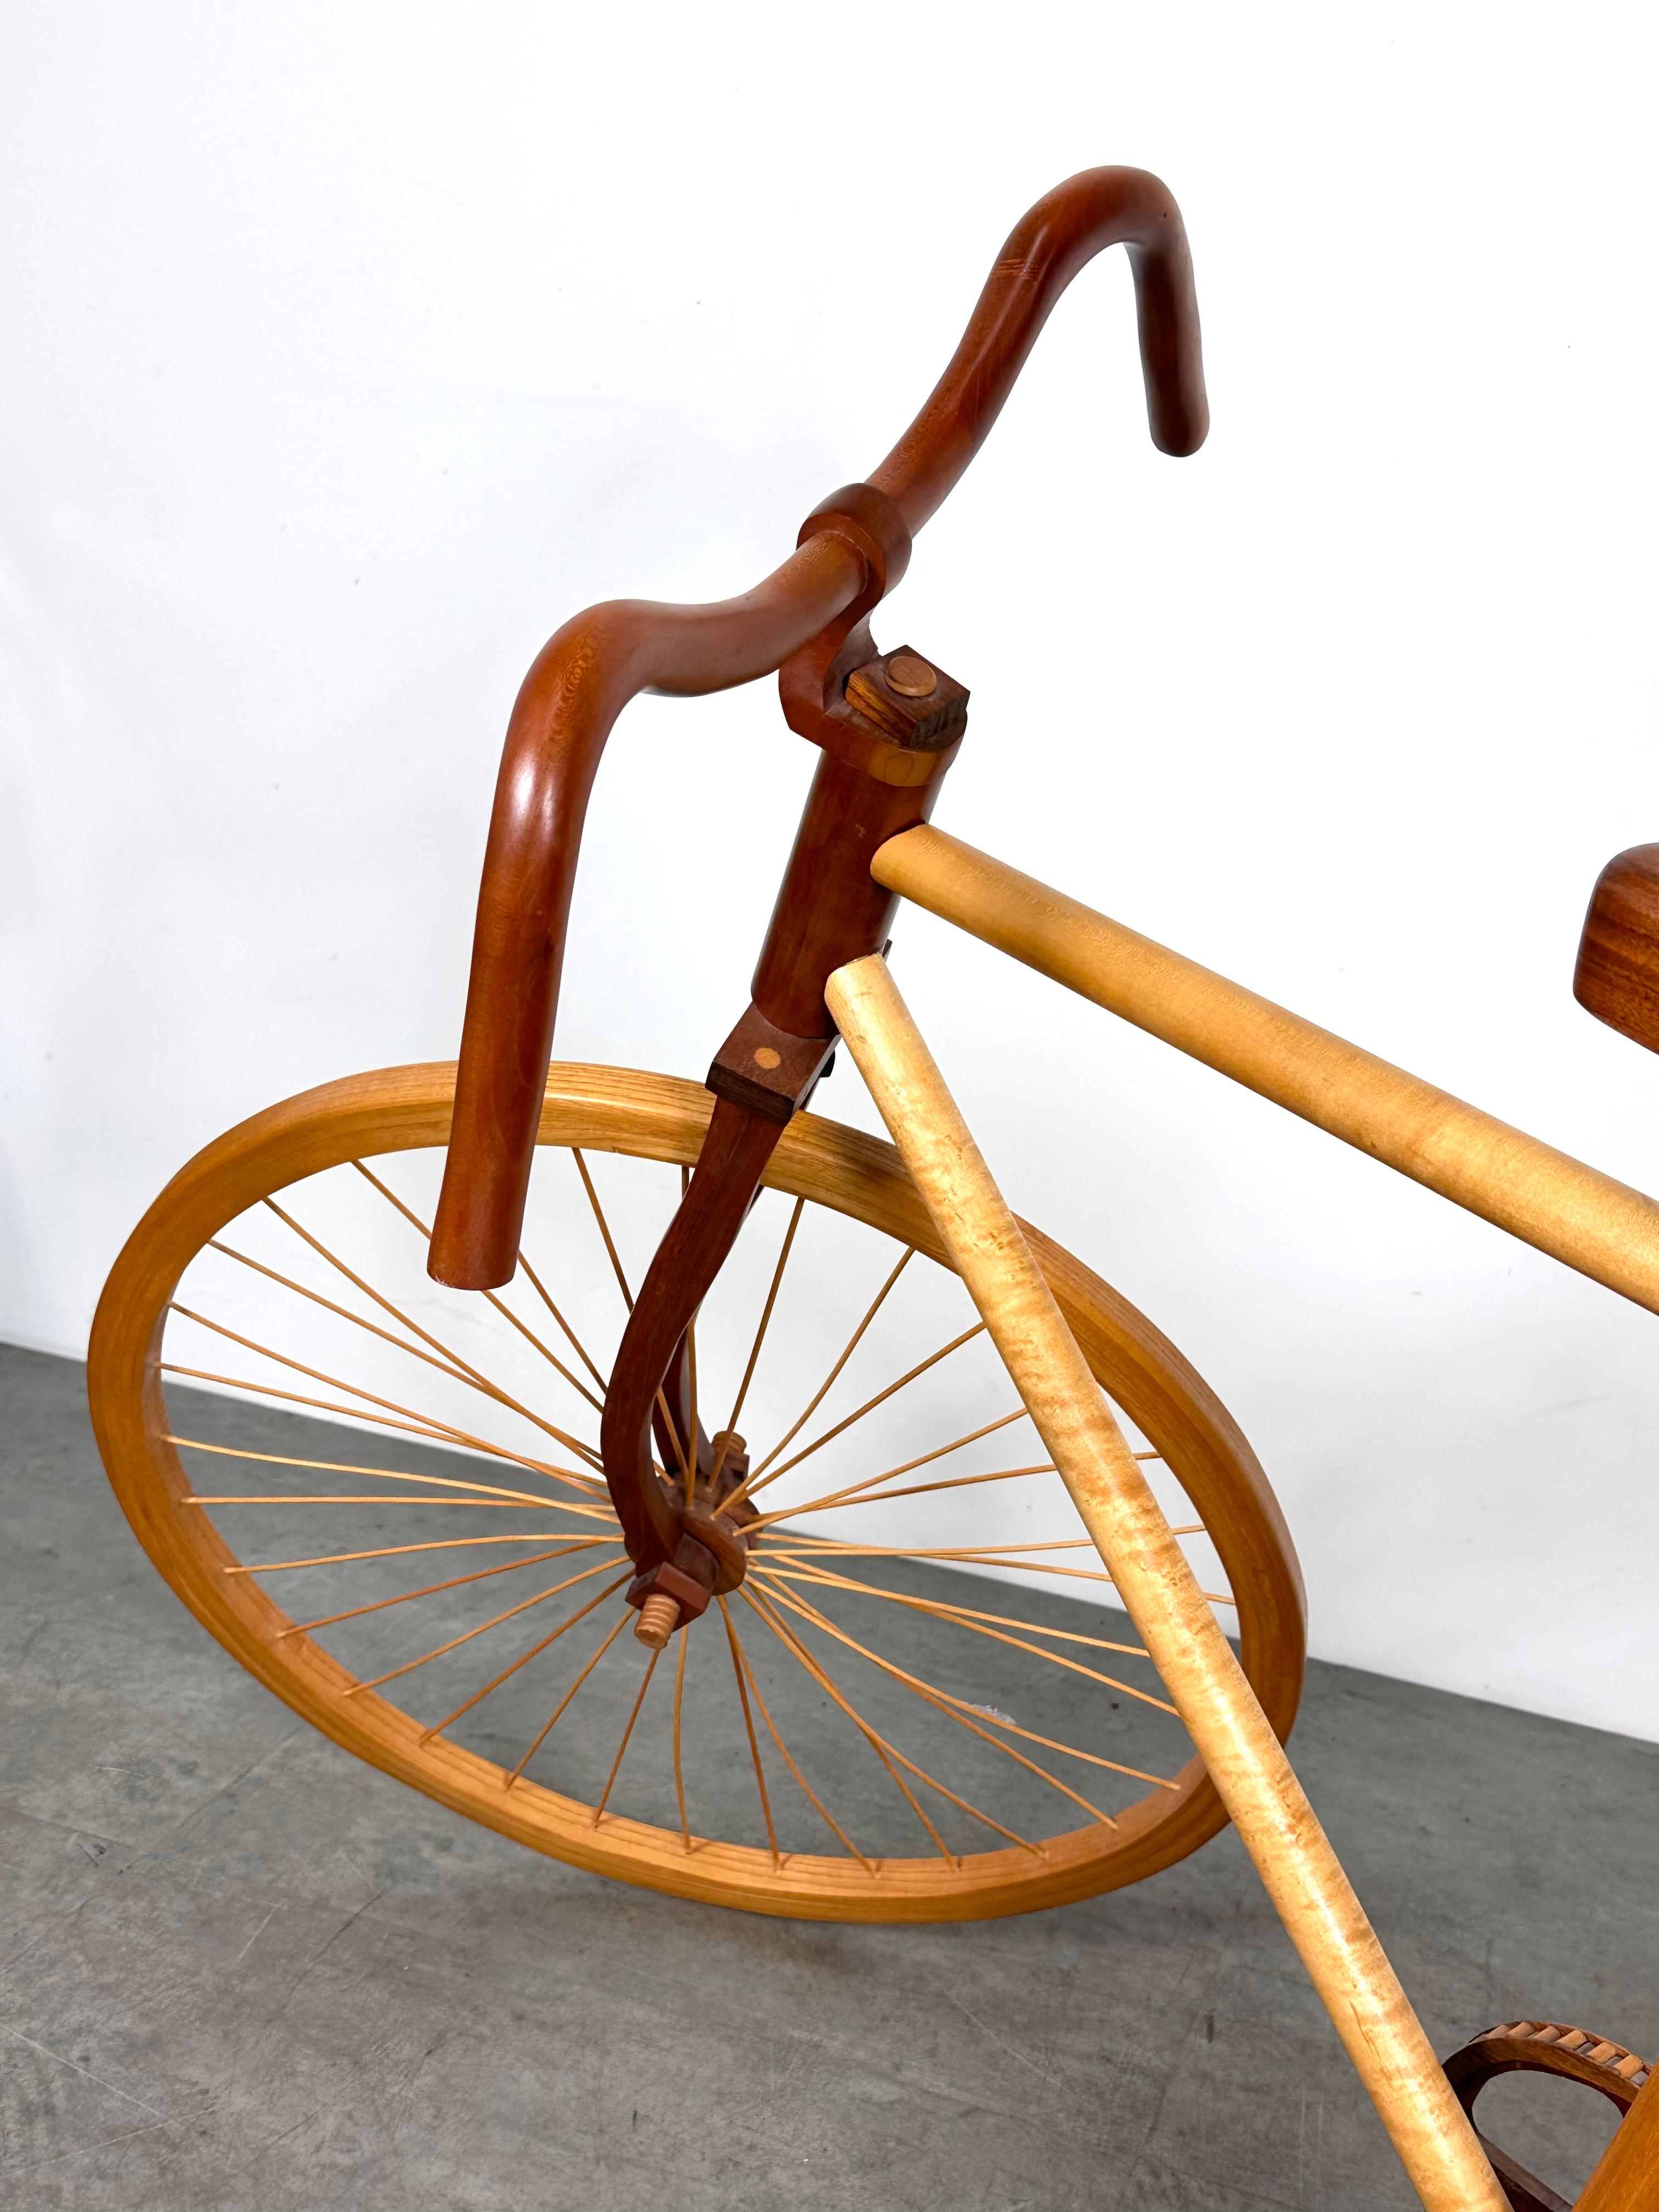 American Studio Craft Life Size Wooden Bicycle Sculpture Artist Signed 1988 For Sale 3